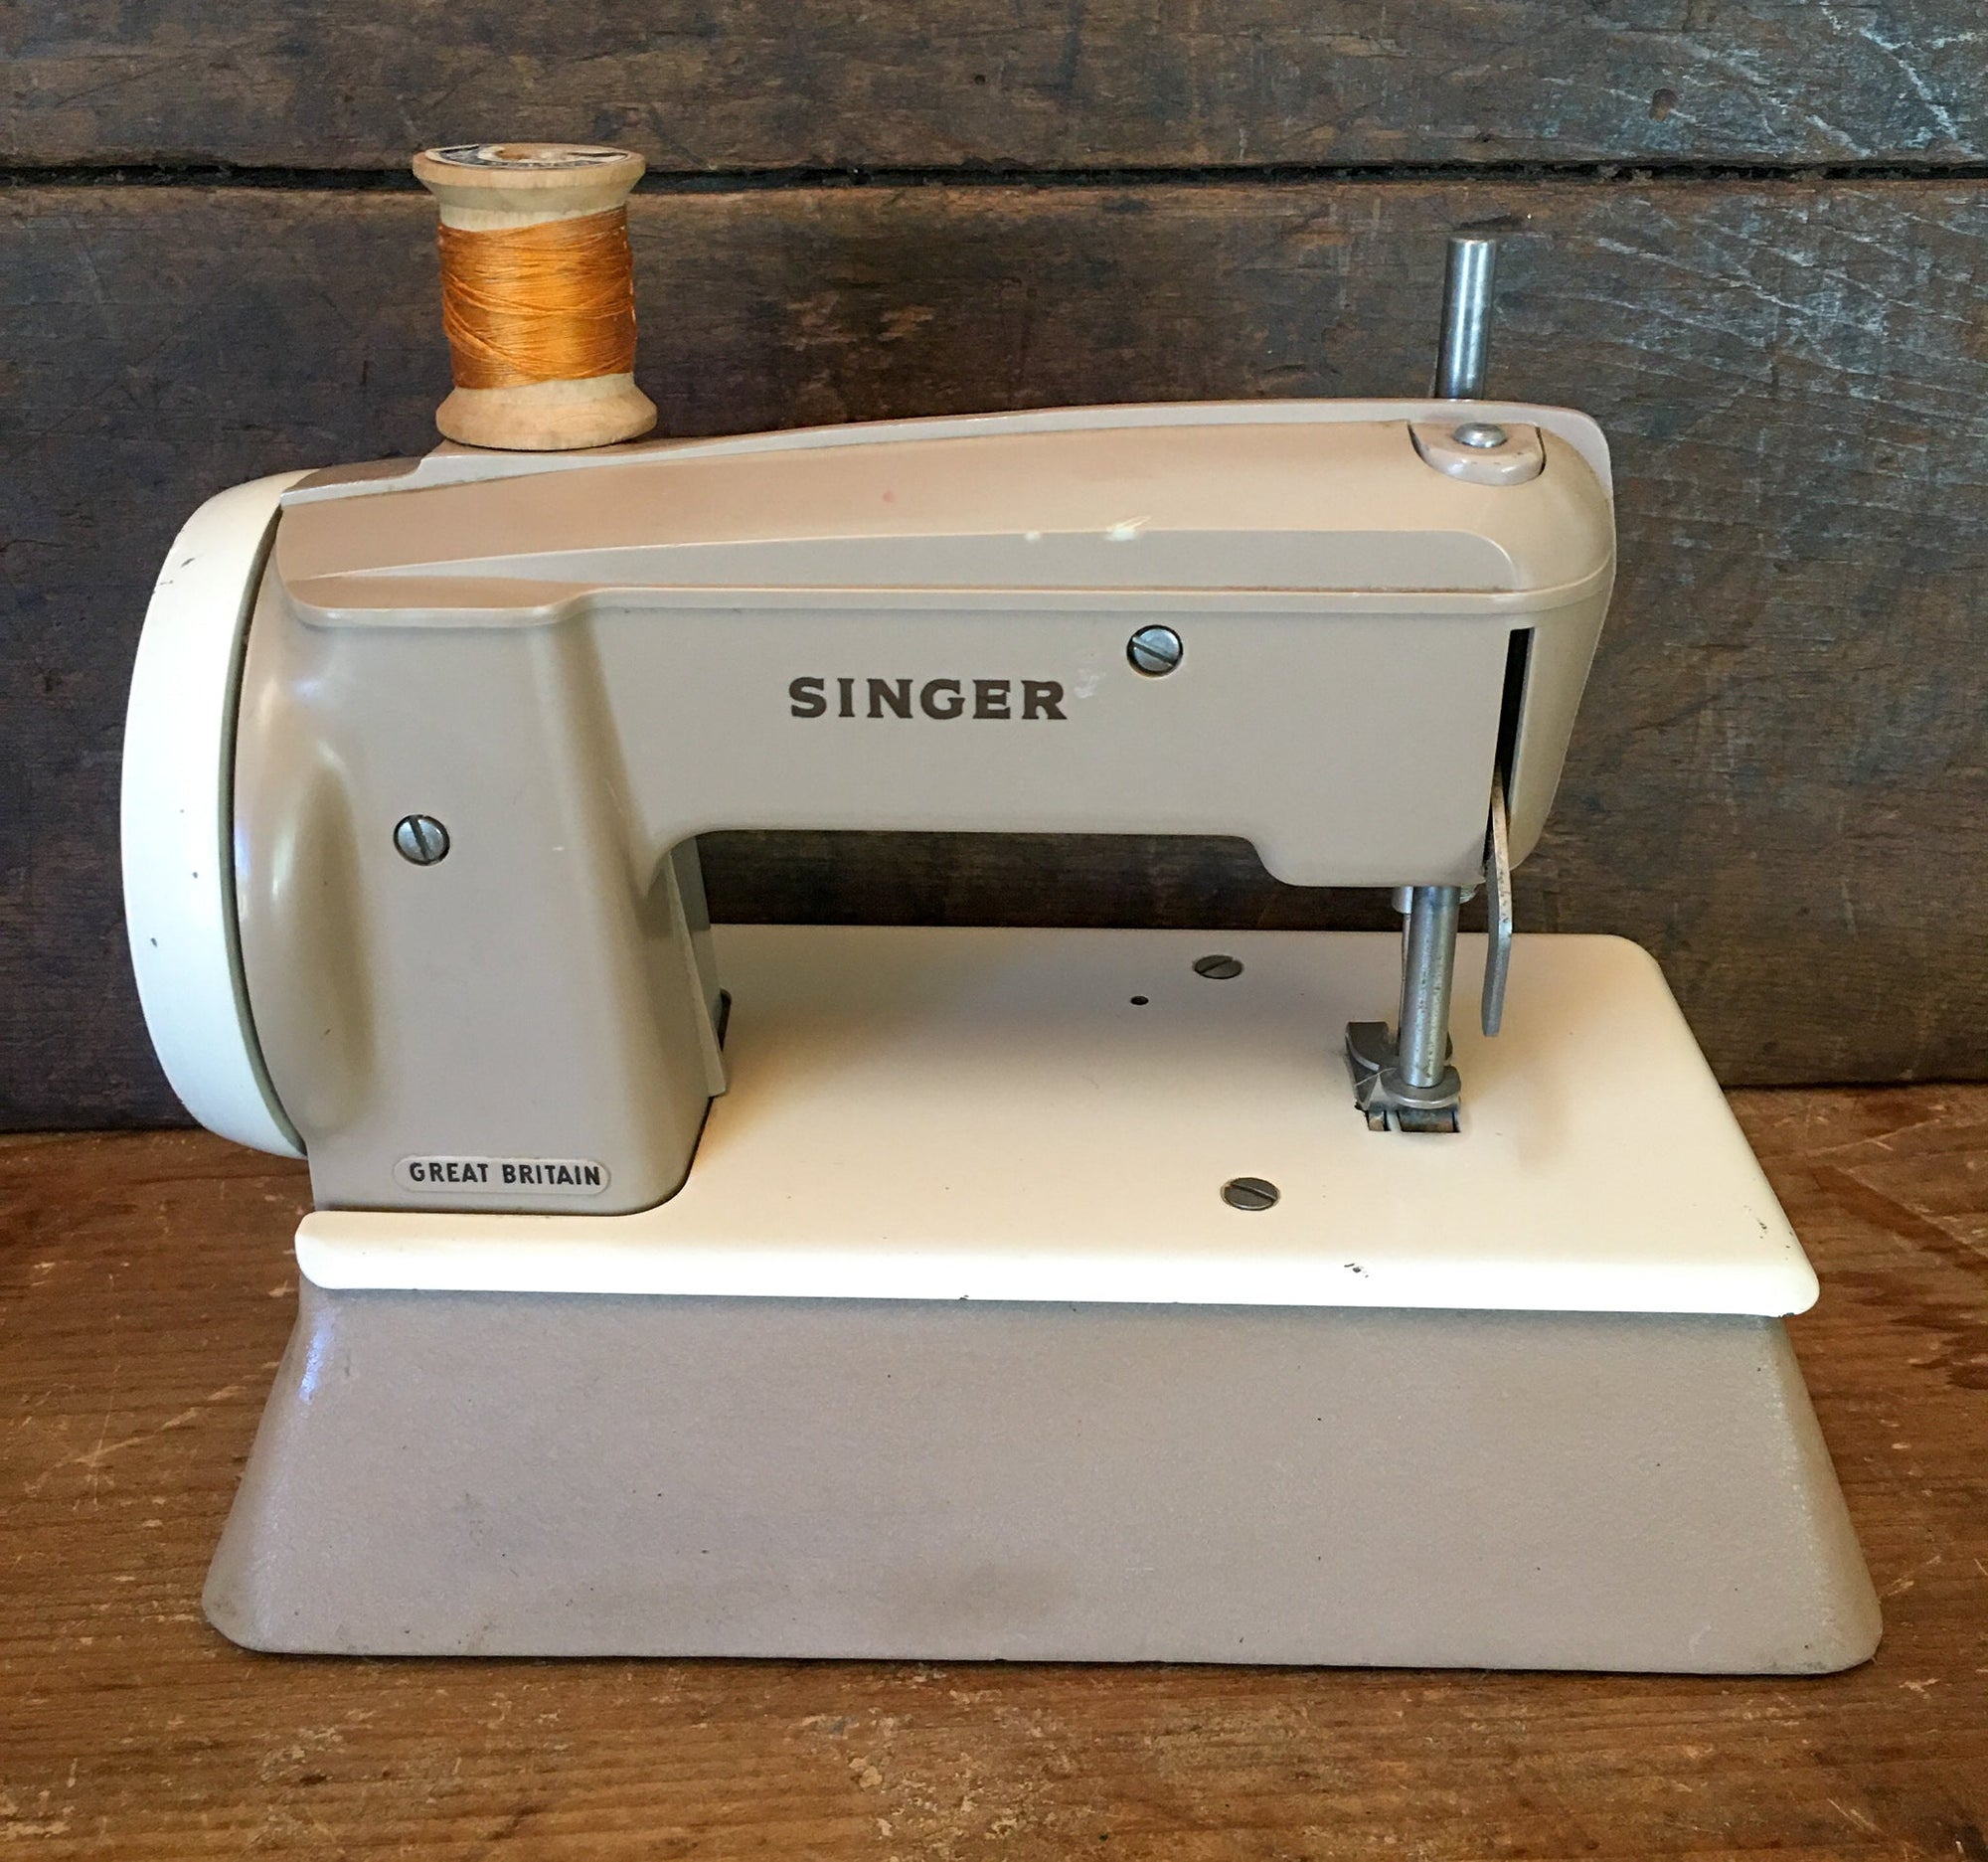 1962 Singer Toy Sewing Machine, Made in Great Britain (#10)